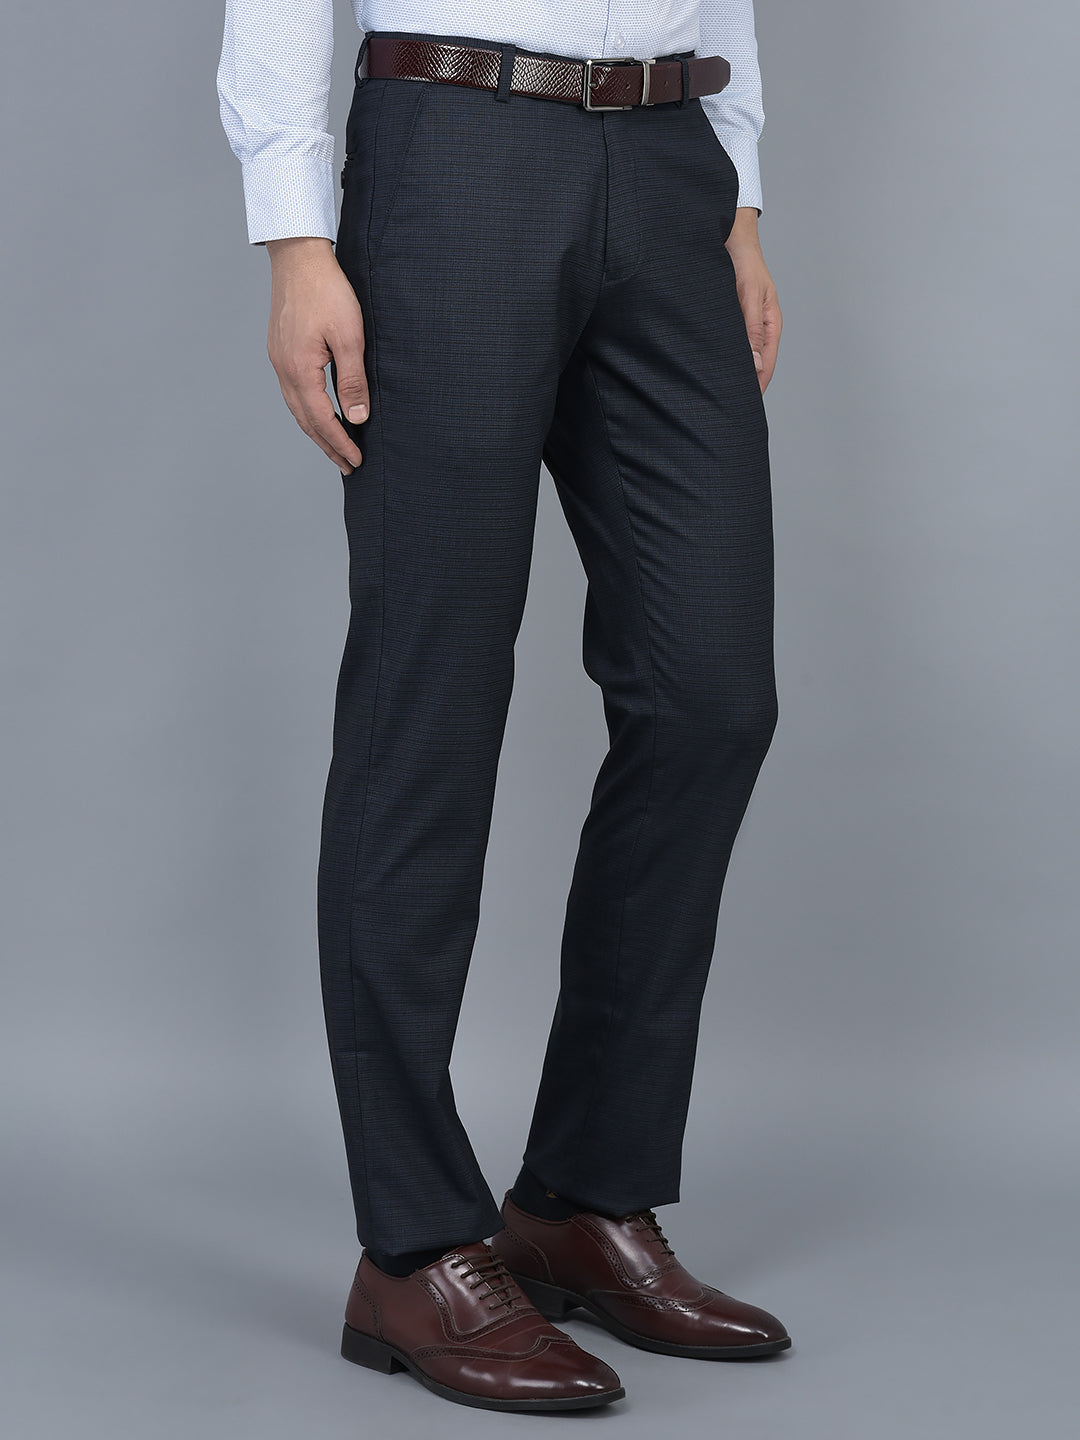 CEO Chino Classic Pocket Cotton Stretch Pants Navy – Collars & Co.